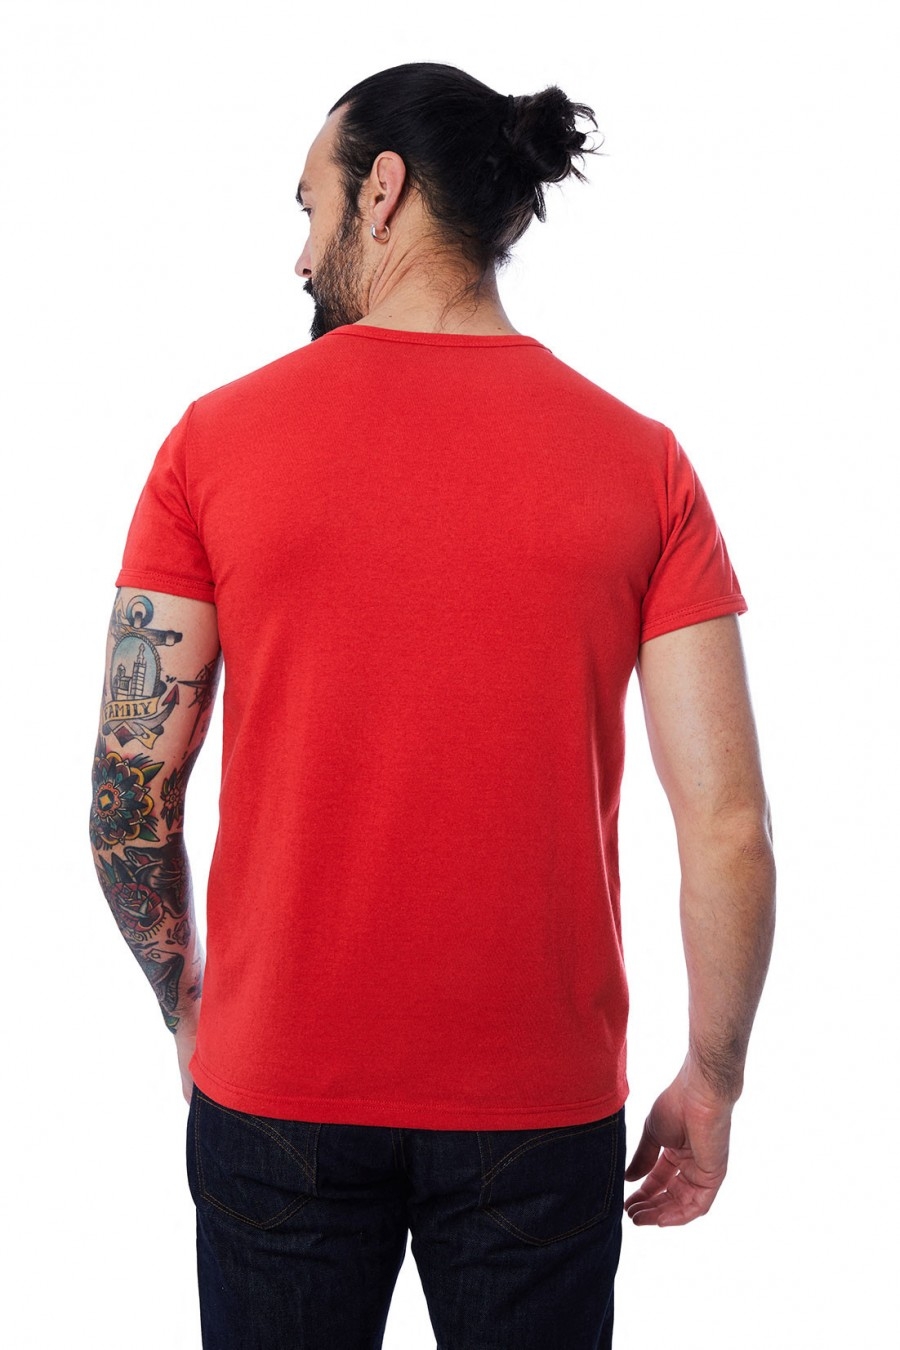 T-SHIRT HOMME MANCHE COURTE COL ROND ROUGE - Made in France & 100% Recyclé